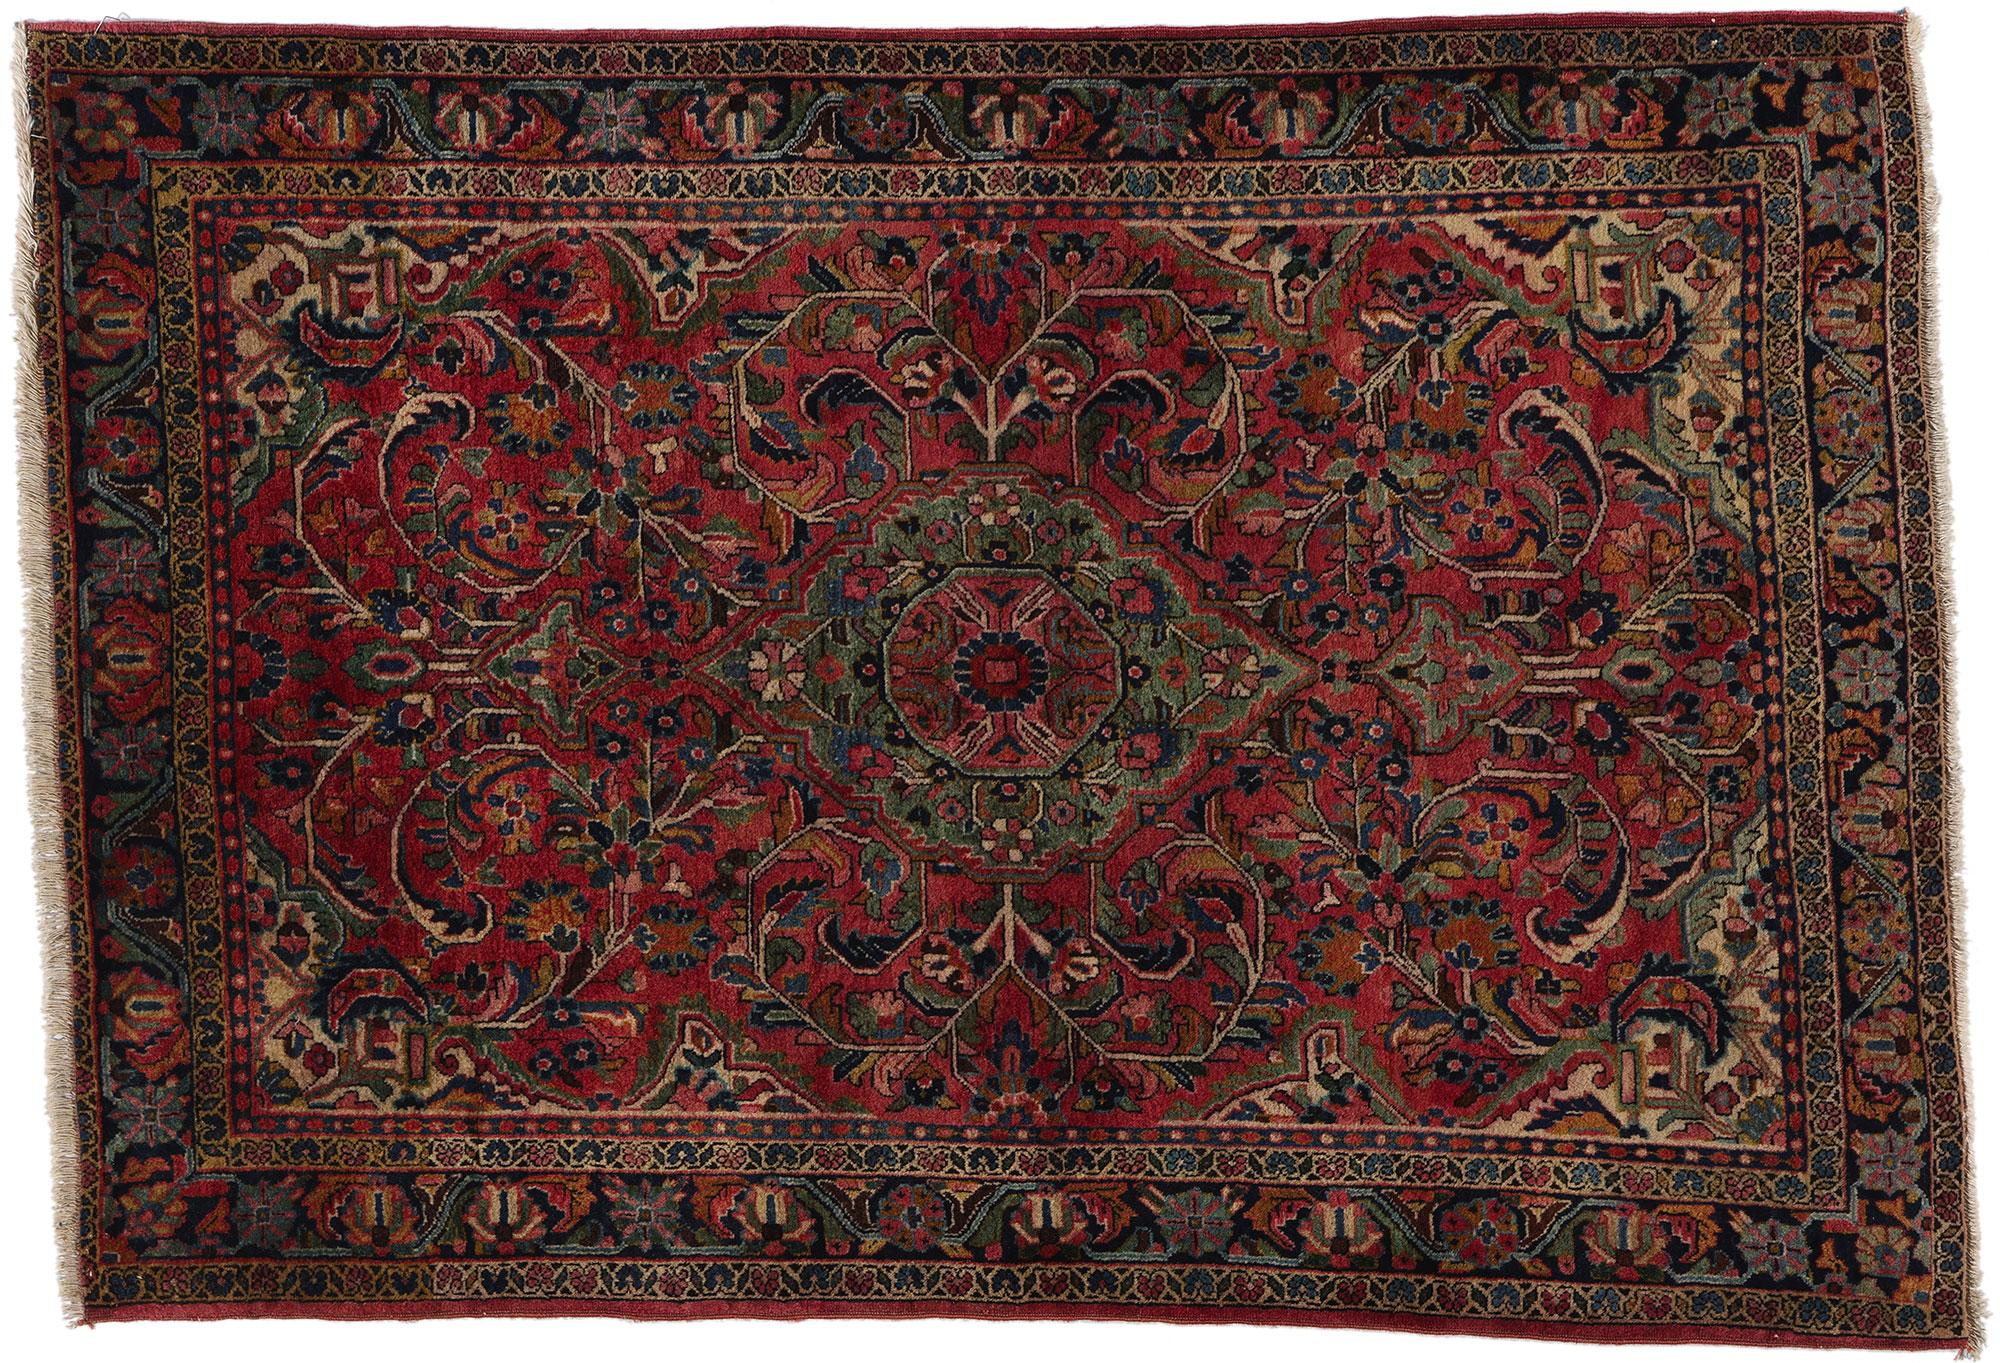 1920s Antique Red Persian Farahan Sarouk Wool Rug with Timeless Elegance For Sale 4